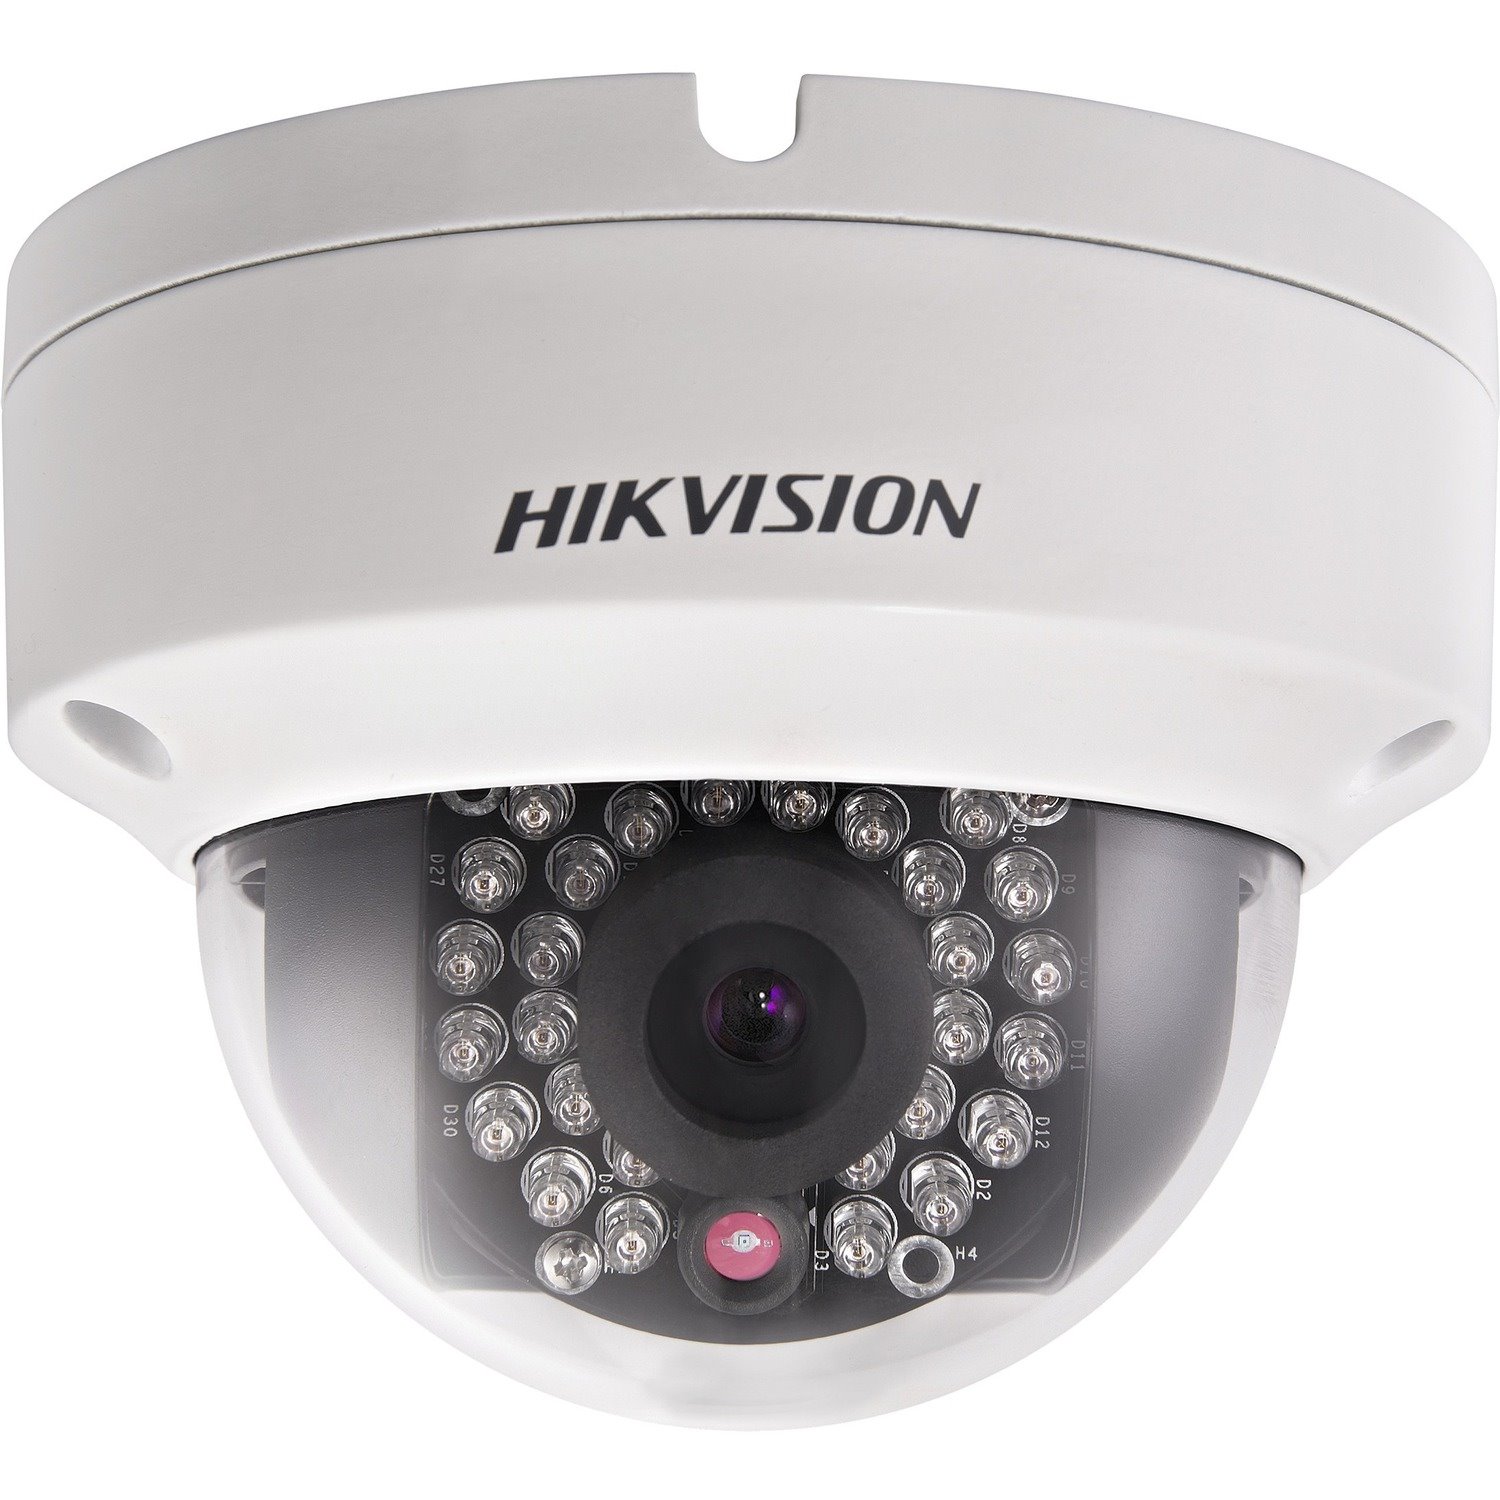 Hikvision Value DS-2CD2142FWD-IS 4 Megapixel HD Network Camera - Color, Monochrome - Dome